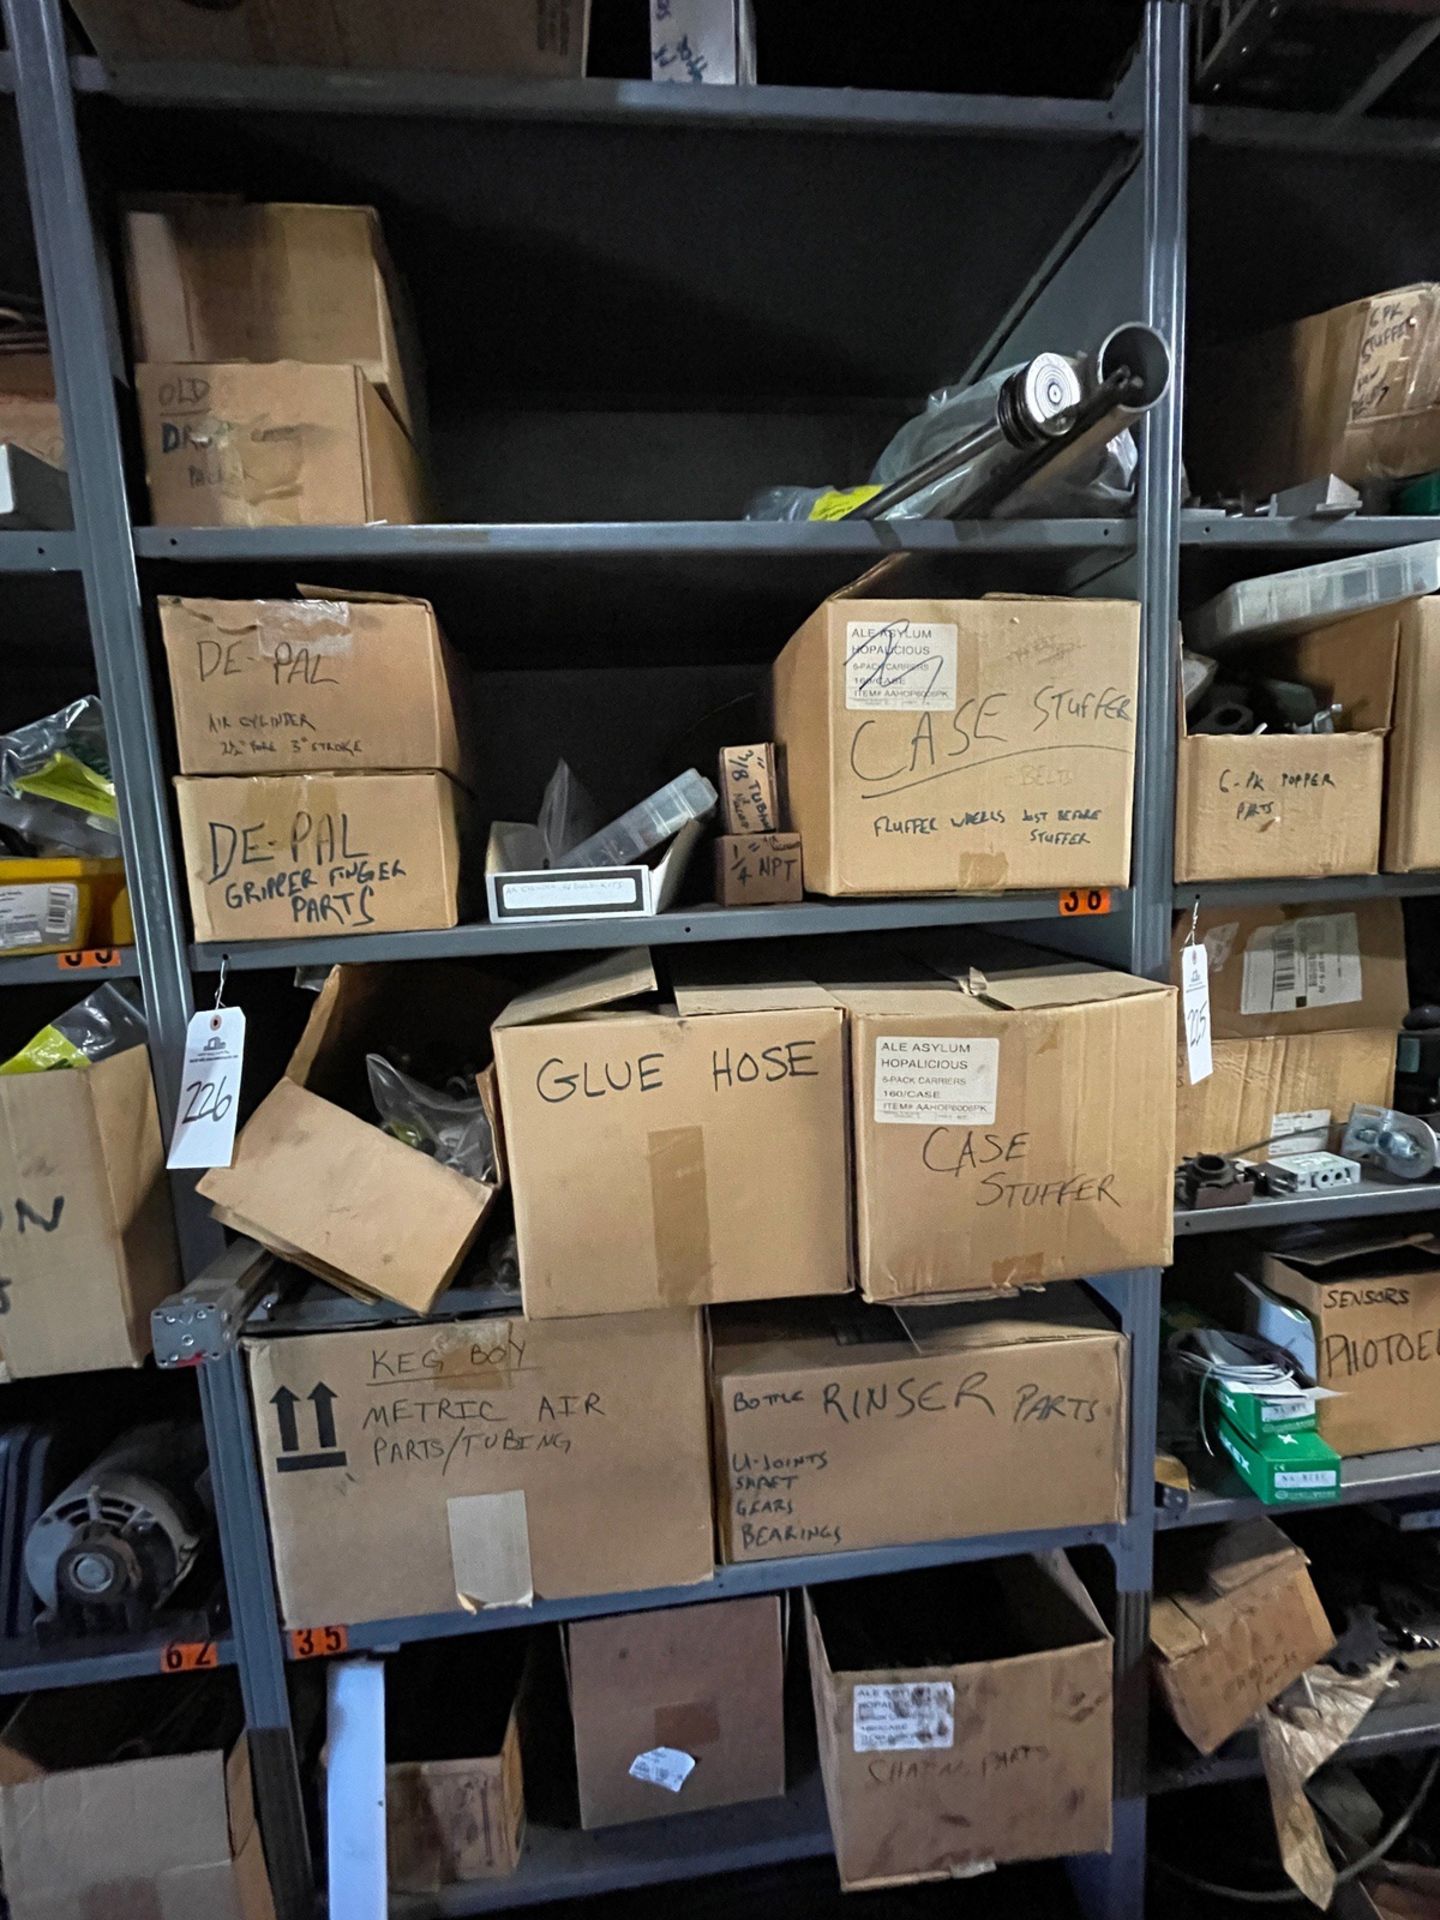 Section of Parts Shelves (includes items on shelf and shelving unit), - Subj to Bulk | Rig Fee $200